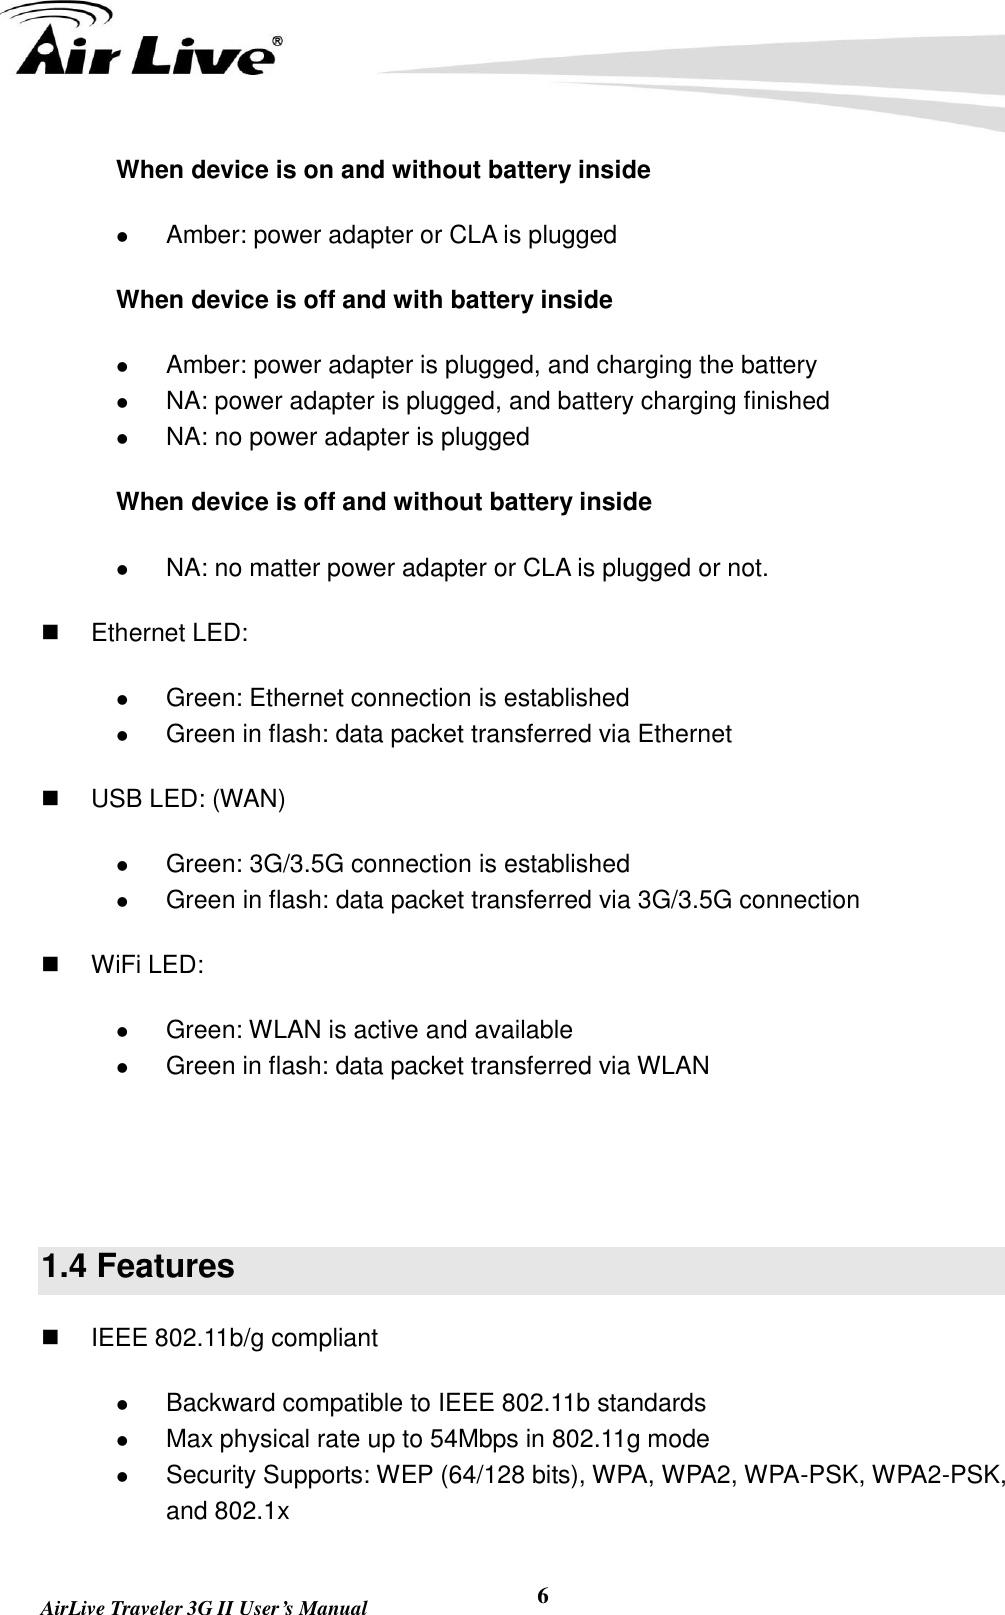   AirLive Traveler 3G II User’s Manual 6 When device is on and without battery inside  Amber: power adapter or CLA is plugged When device is off and with battery inside  Amber: power adapter is plugged, and charging the battery  NA: power adapter is plugged, and battery charging finished  NA: no power adapter is plugged When device is off and without battery inside  NA: no matter power adapter or CLA is plugged or not.   Ethernet LED:    Green: Ethernet connection is established  Green in flash: data packet transferred via Ethernet   USB LED: (WAN)  Green: 3G/3.5G connection is established  Green in flash: data packet transferred via 3G/3.5G connection   WiFi LED:    Green: WLAN is active and available  Green in flash: data packet transferred via WLAN   1.4 Features   IEEE 802.11b/g compliant  Backward compatible to IEEE 802.11b standards  Max physical rate up to 54Mbps in 802.11g mode  Security Supports: WEP (64/128 bits), WPA, WPA2, WPA-PSK, WPA2-PSK, and 802.1x 